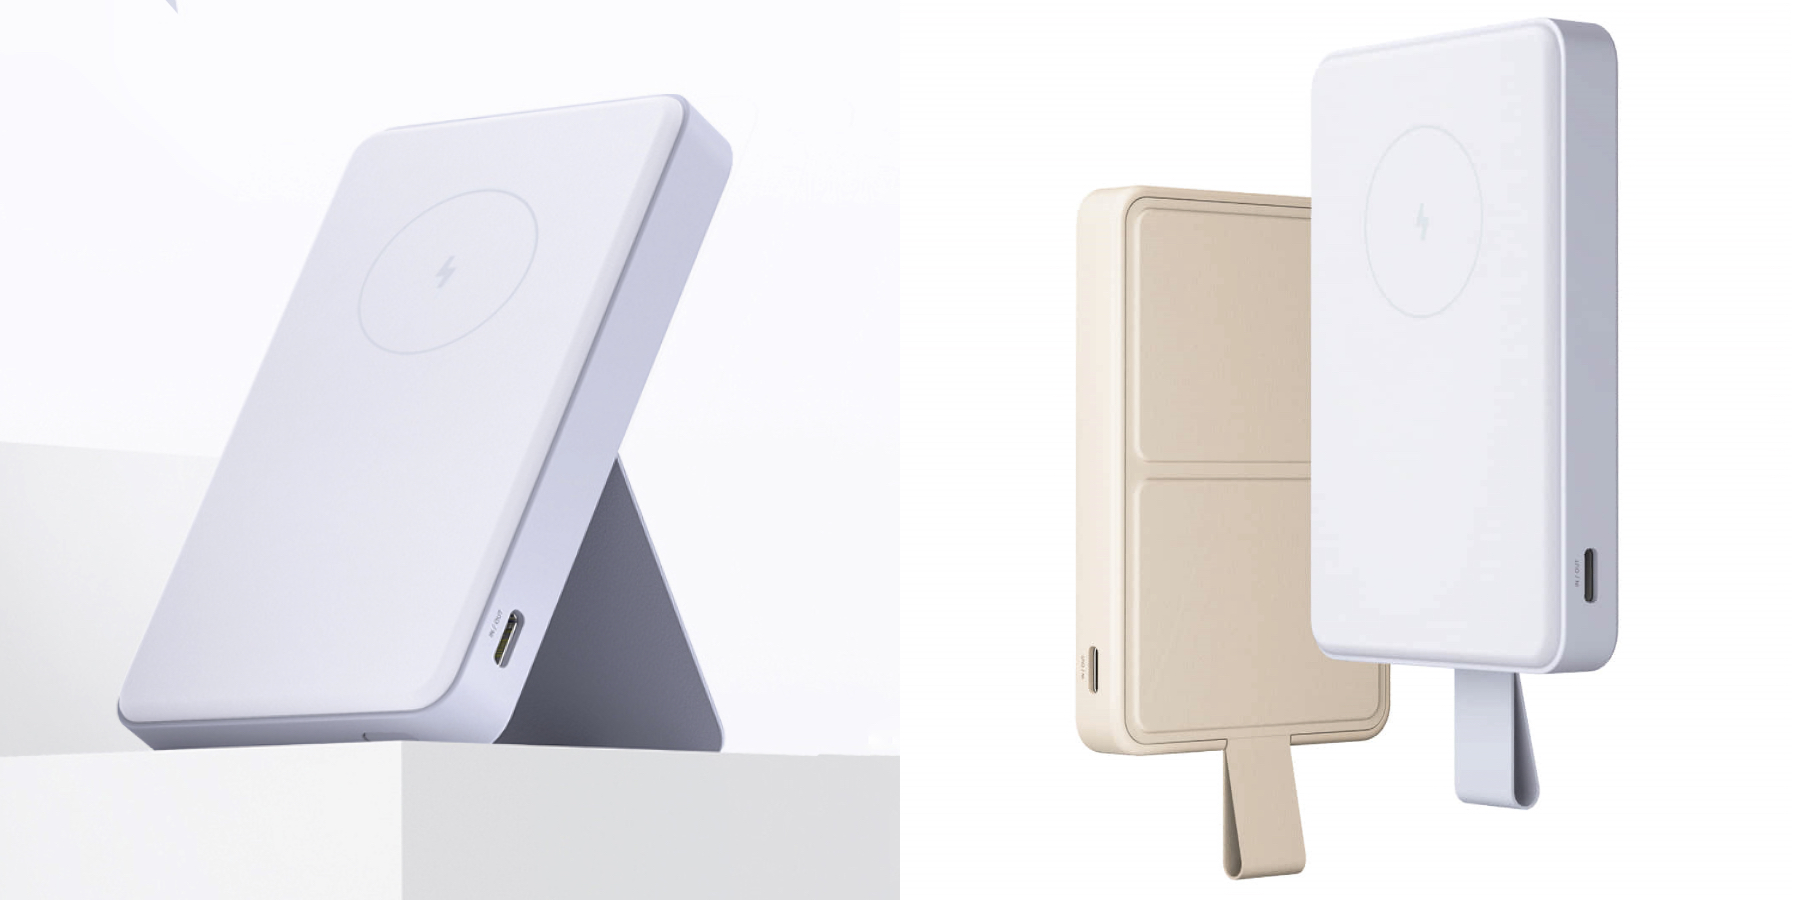 Xiaomi has revealed a 6,000 mAh magnetic power bank with Qi2 support